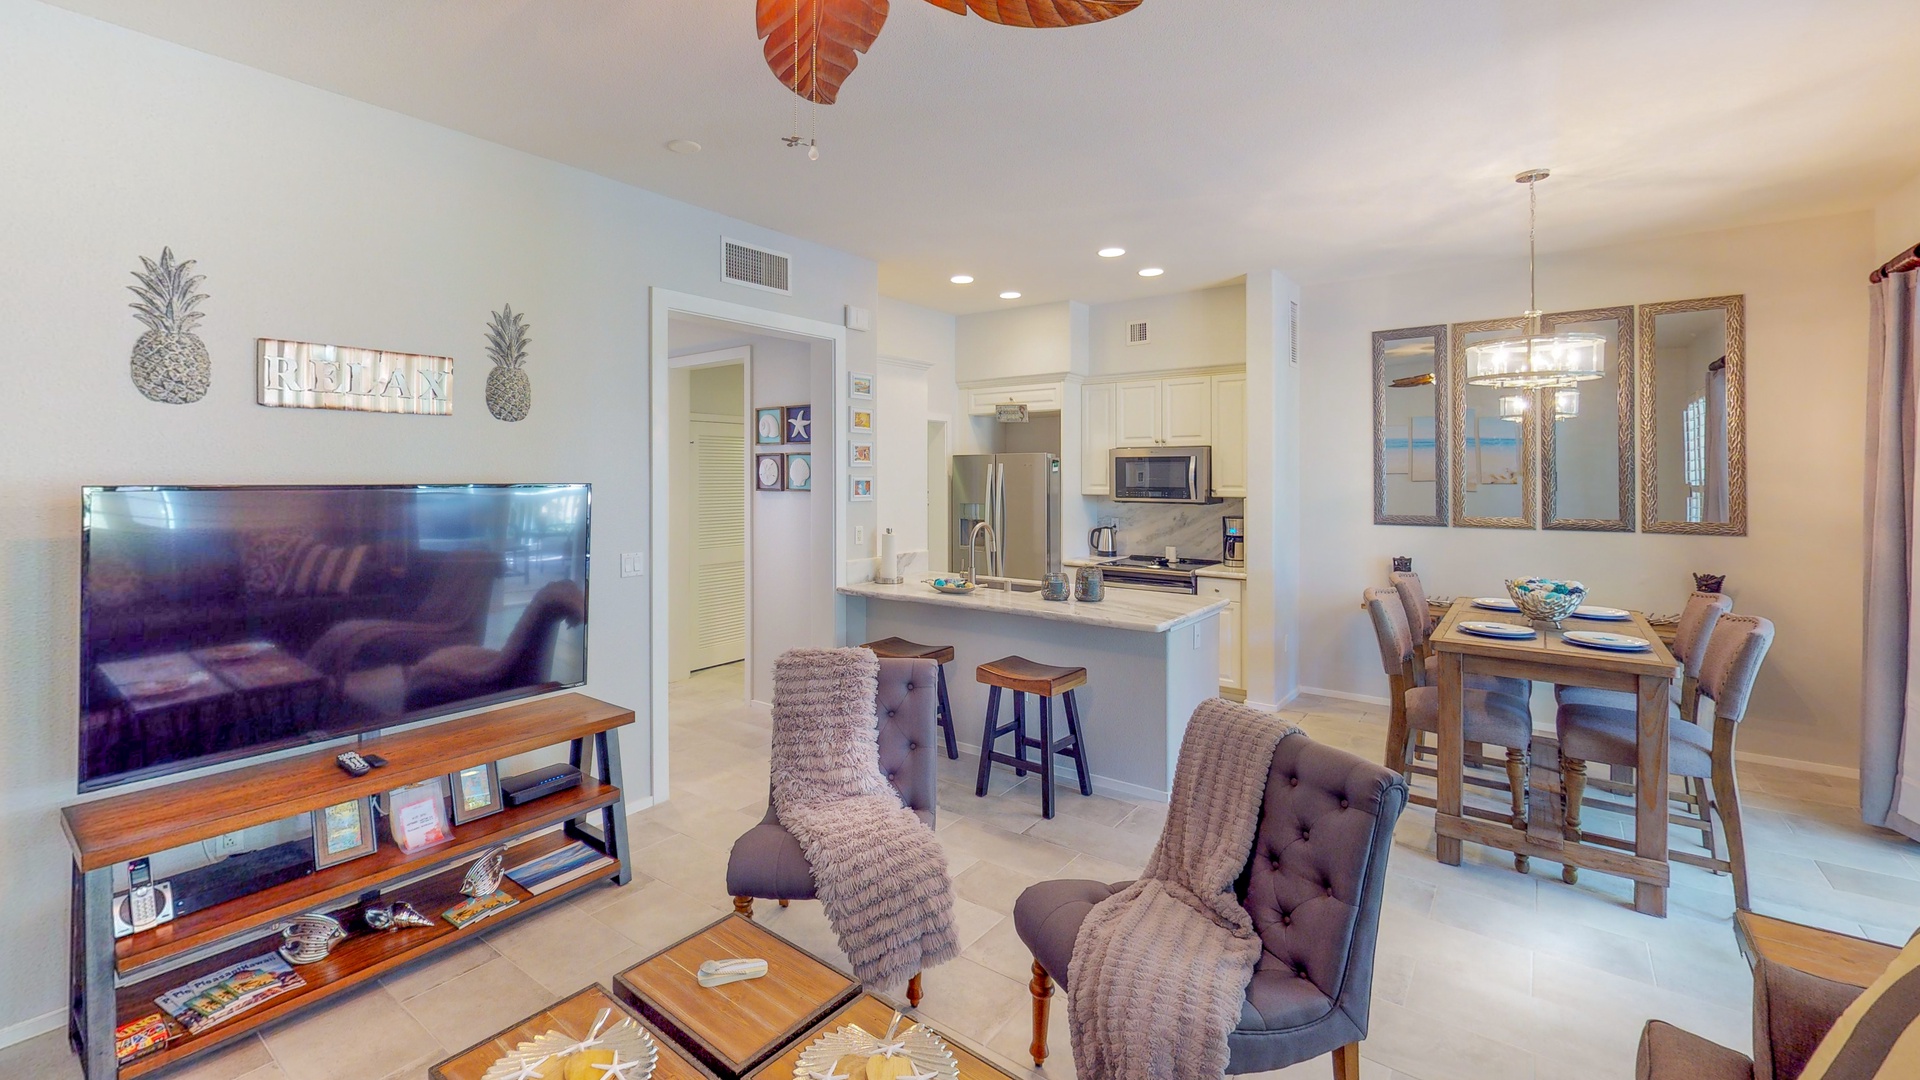 Kapolei Vacation Rentals, Coconut Plantation 1222-3 - This high end condo has an open floor plan for seamless living with kitchen, living and dining areas.